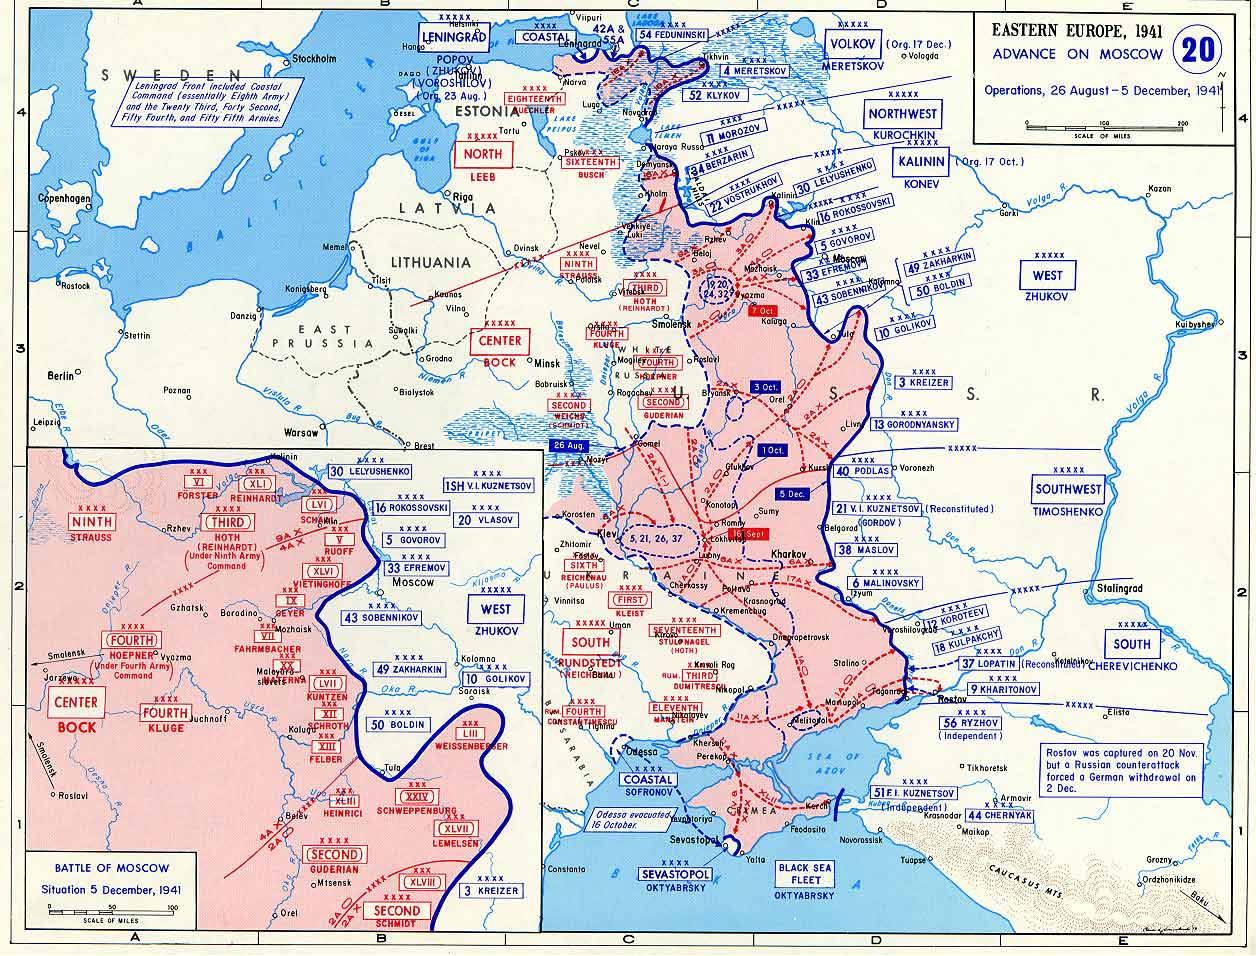 Map depicting the German advance on Moscow, Russia, 26 Aug-5 Dec 1941